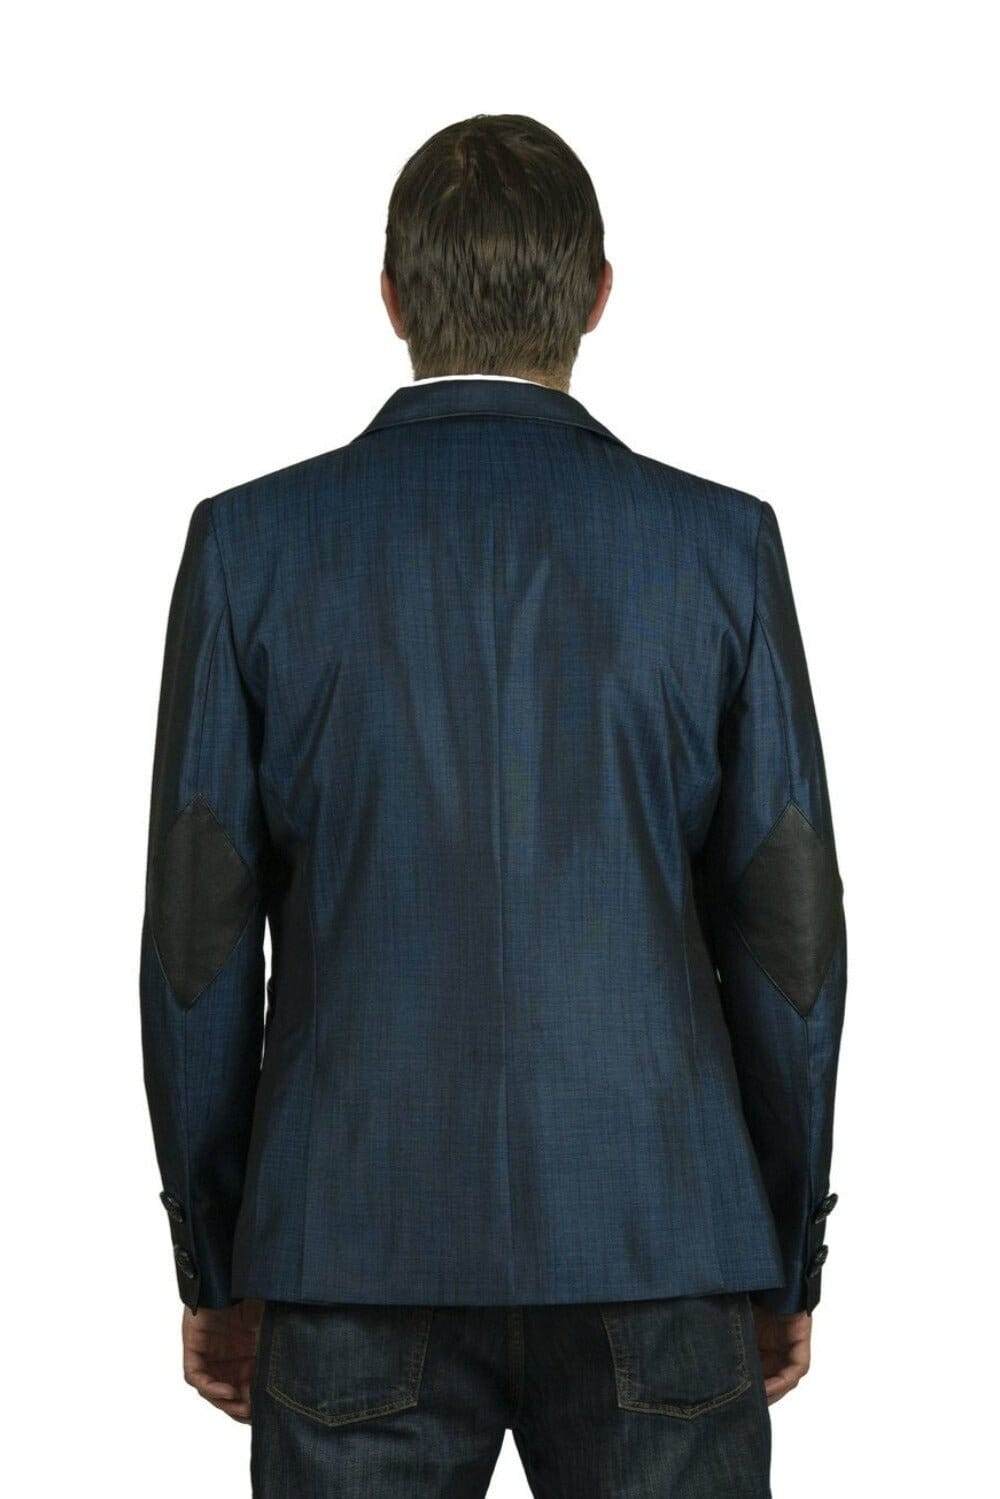 mens alternative style blue blazer with elbow pads and skull buttons